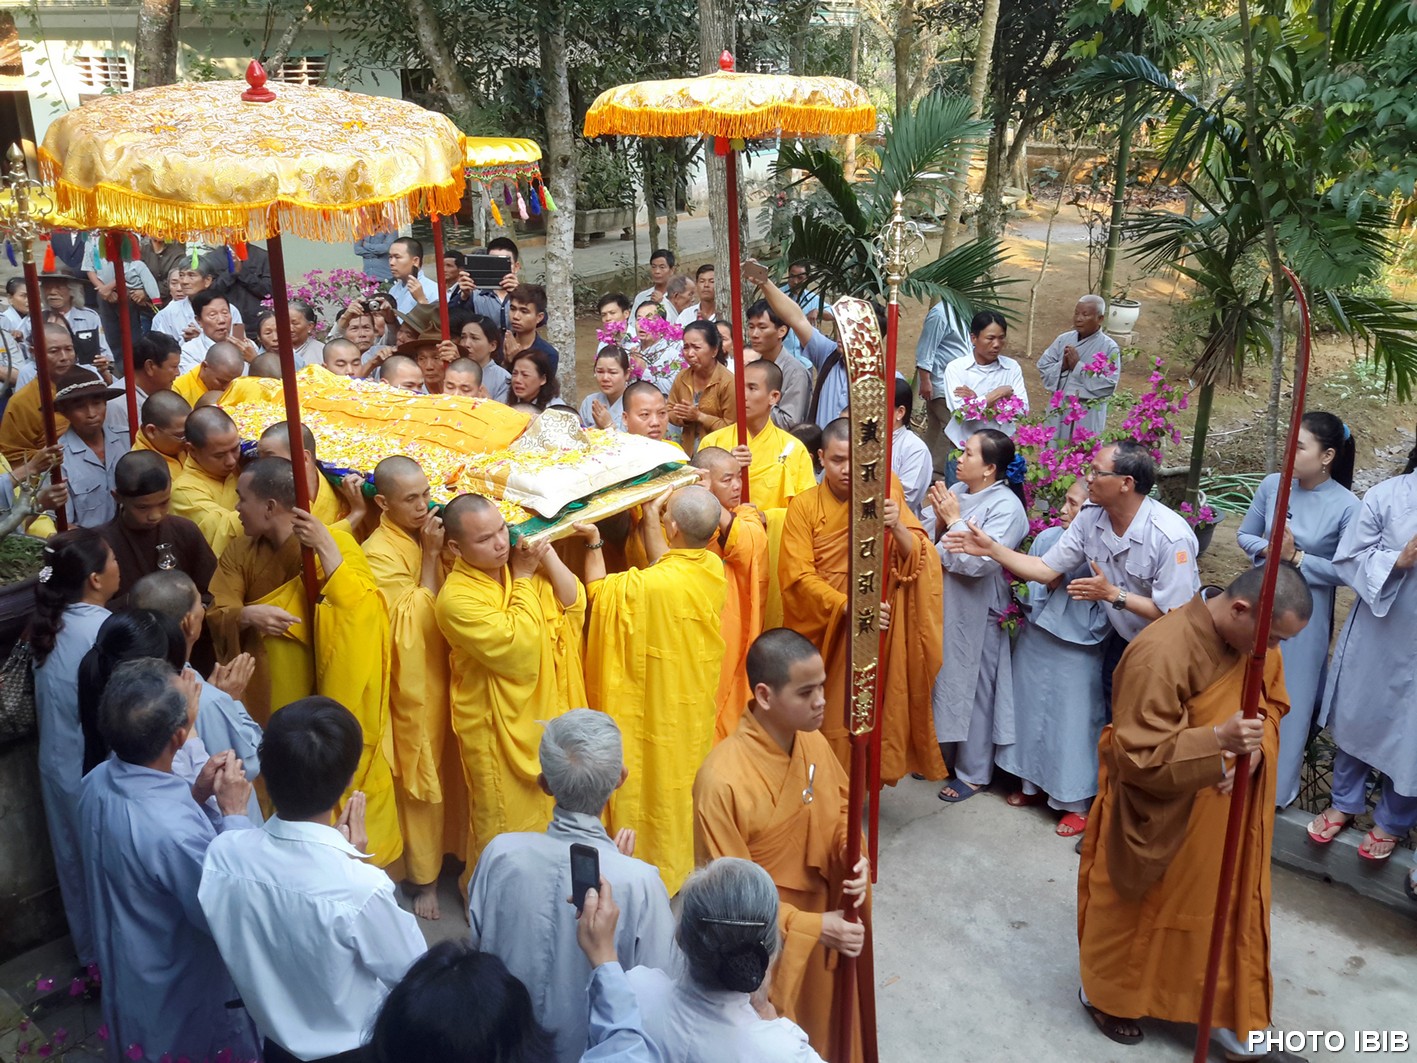 Monks carry Thich Nhu Dat’s coffin at the funeral service at Long Quang Pagoda, Hue, on 26.2.2015